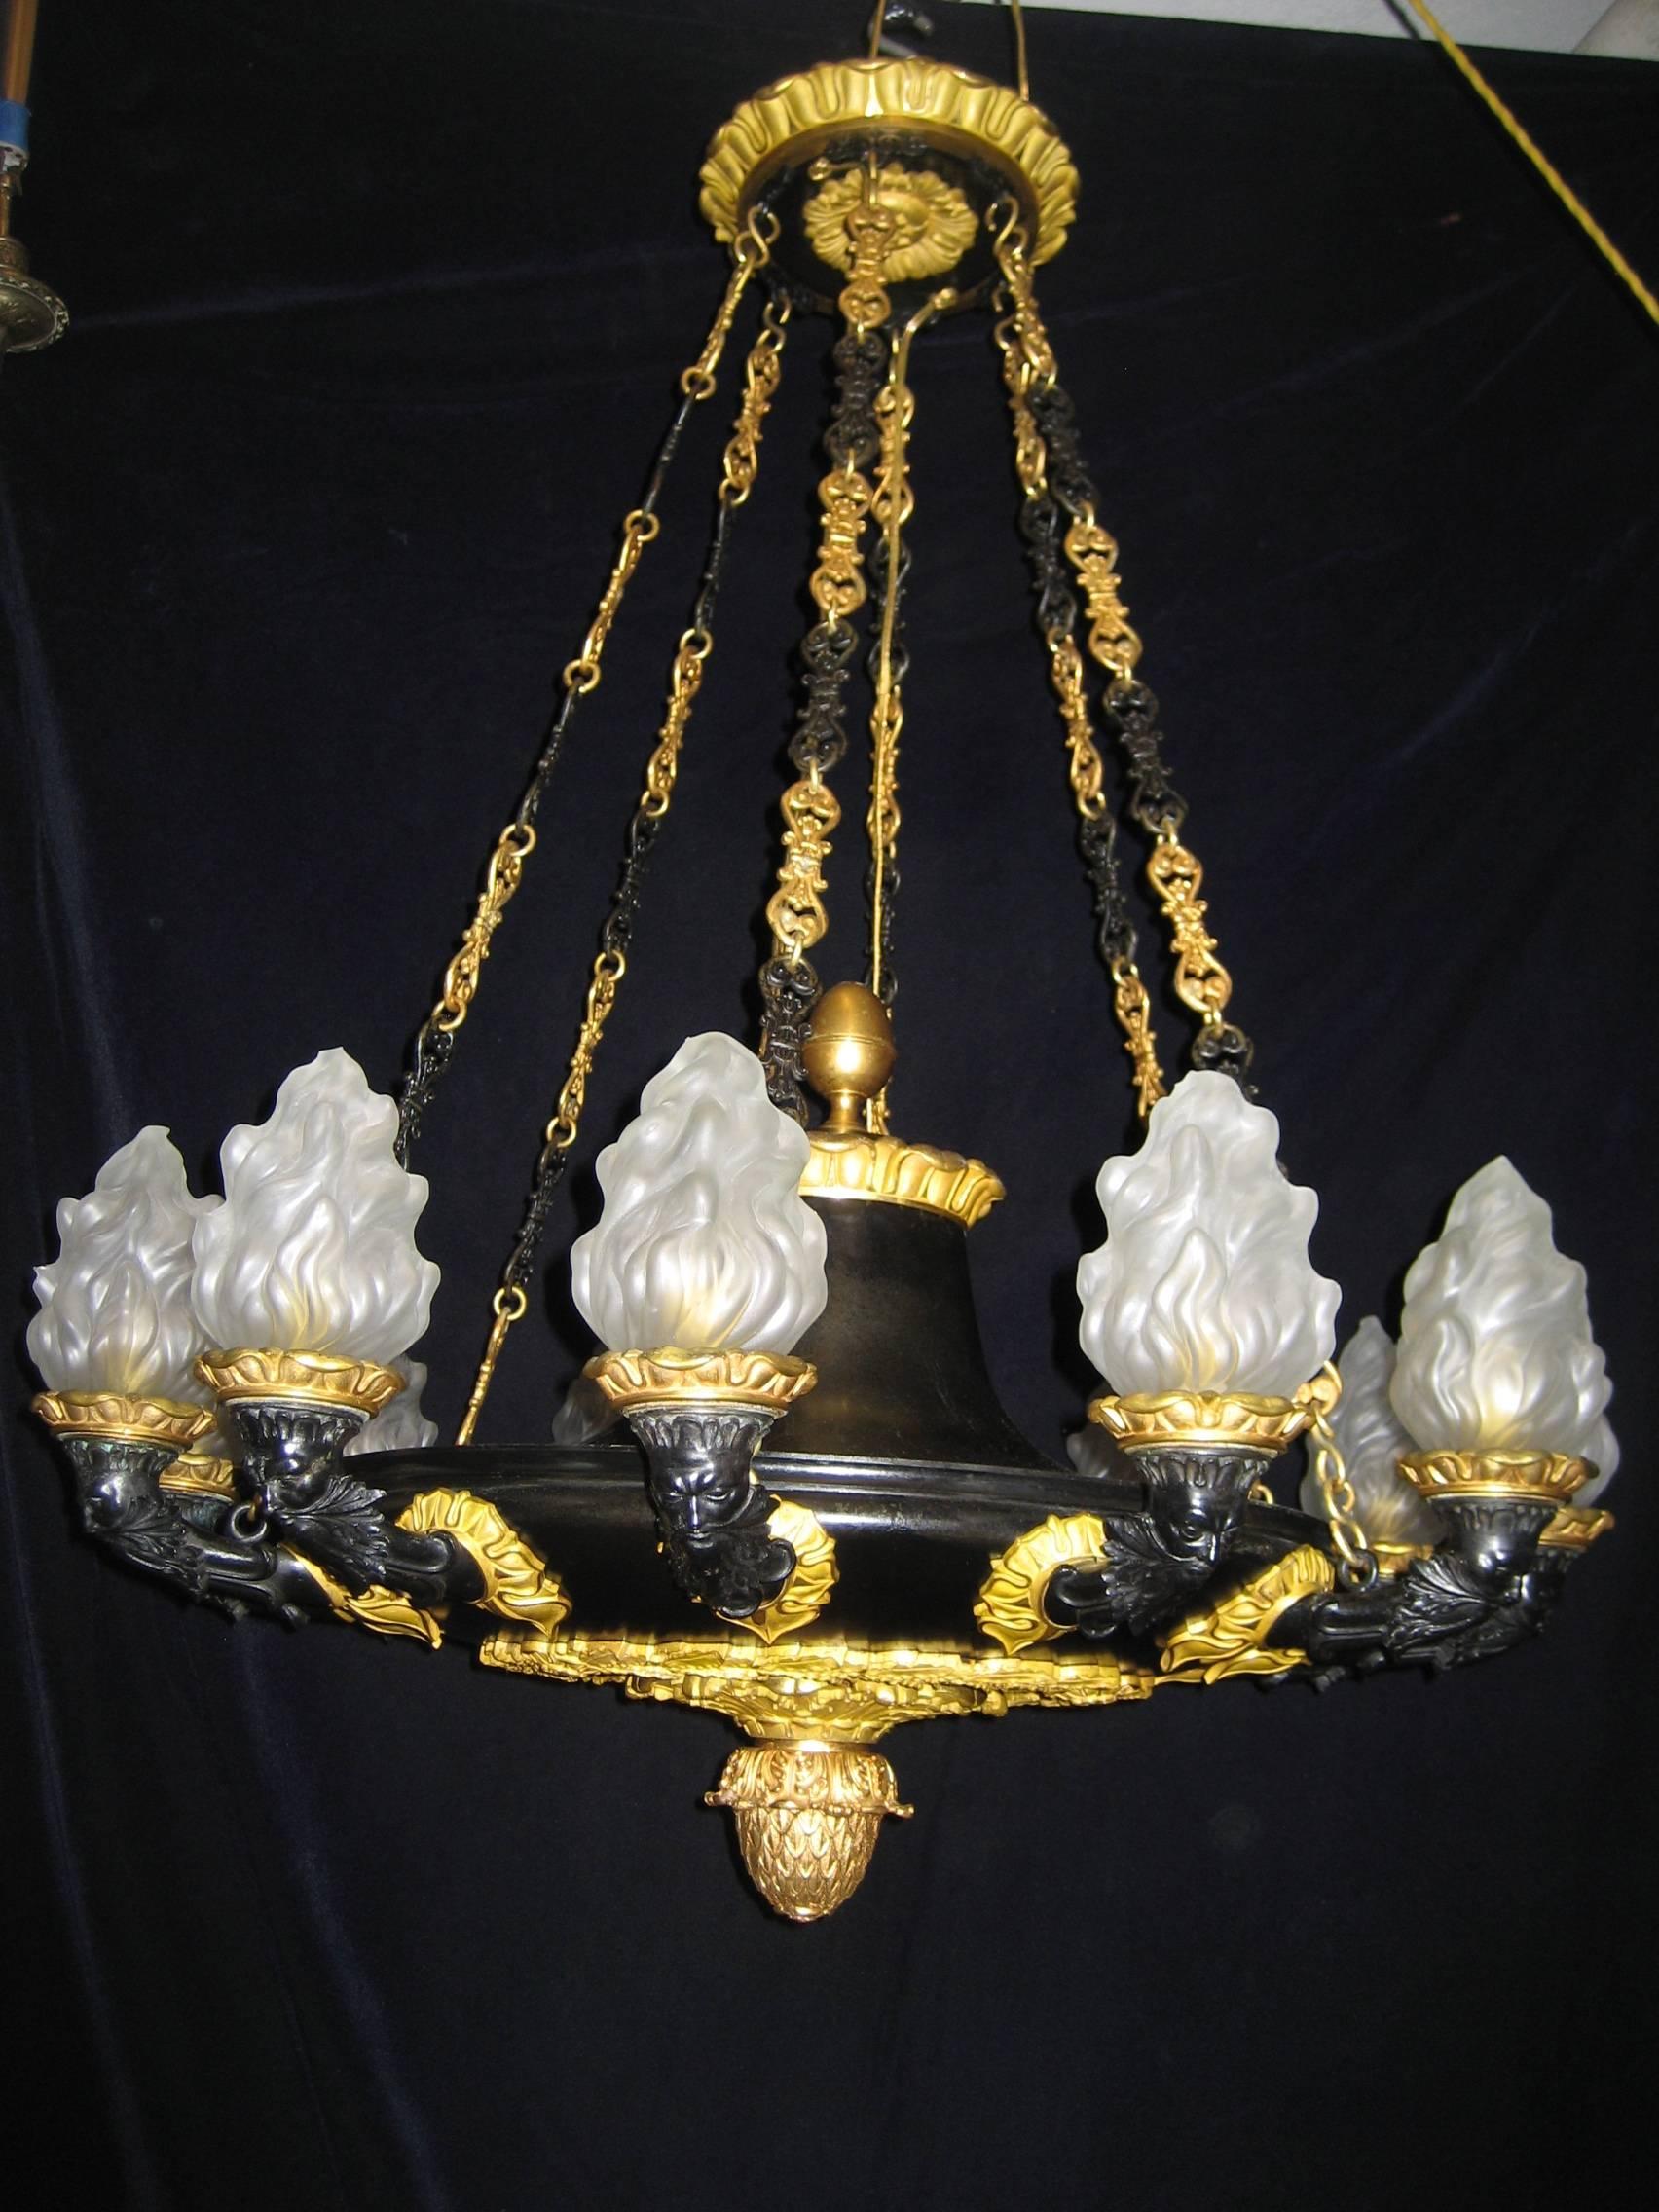 A spectacular and large antique French Empire style gilt bronze and patinated bronze multi light neoclassical chandelier of great detail embellished with neoclassical motifs and further adorned with figural masks.